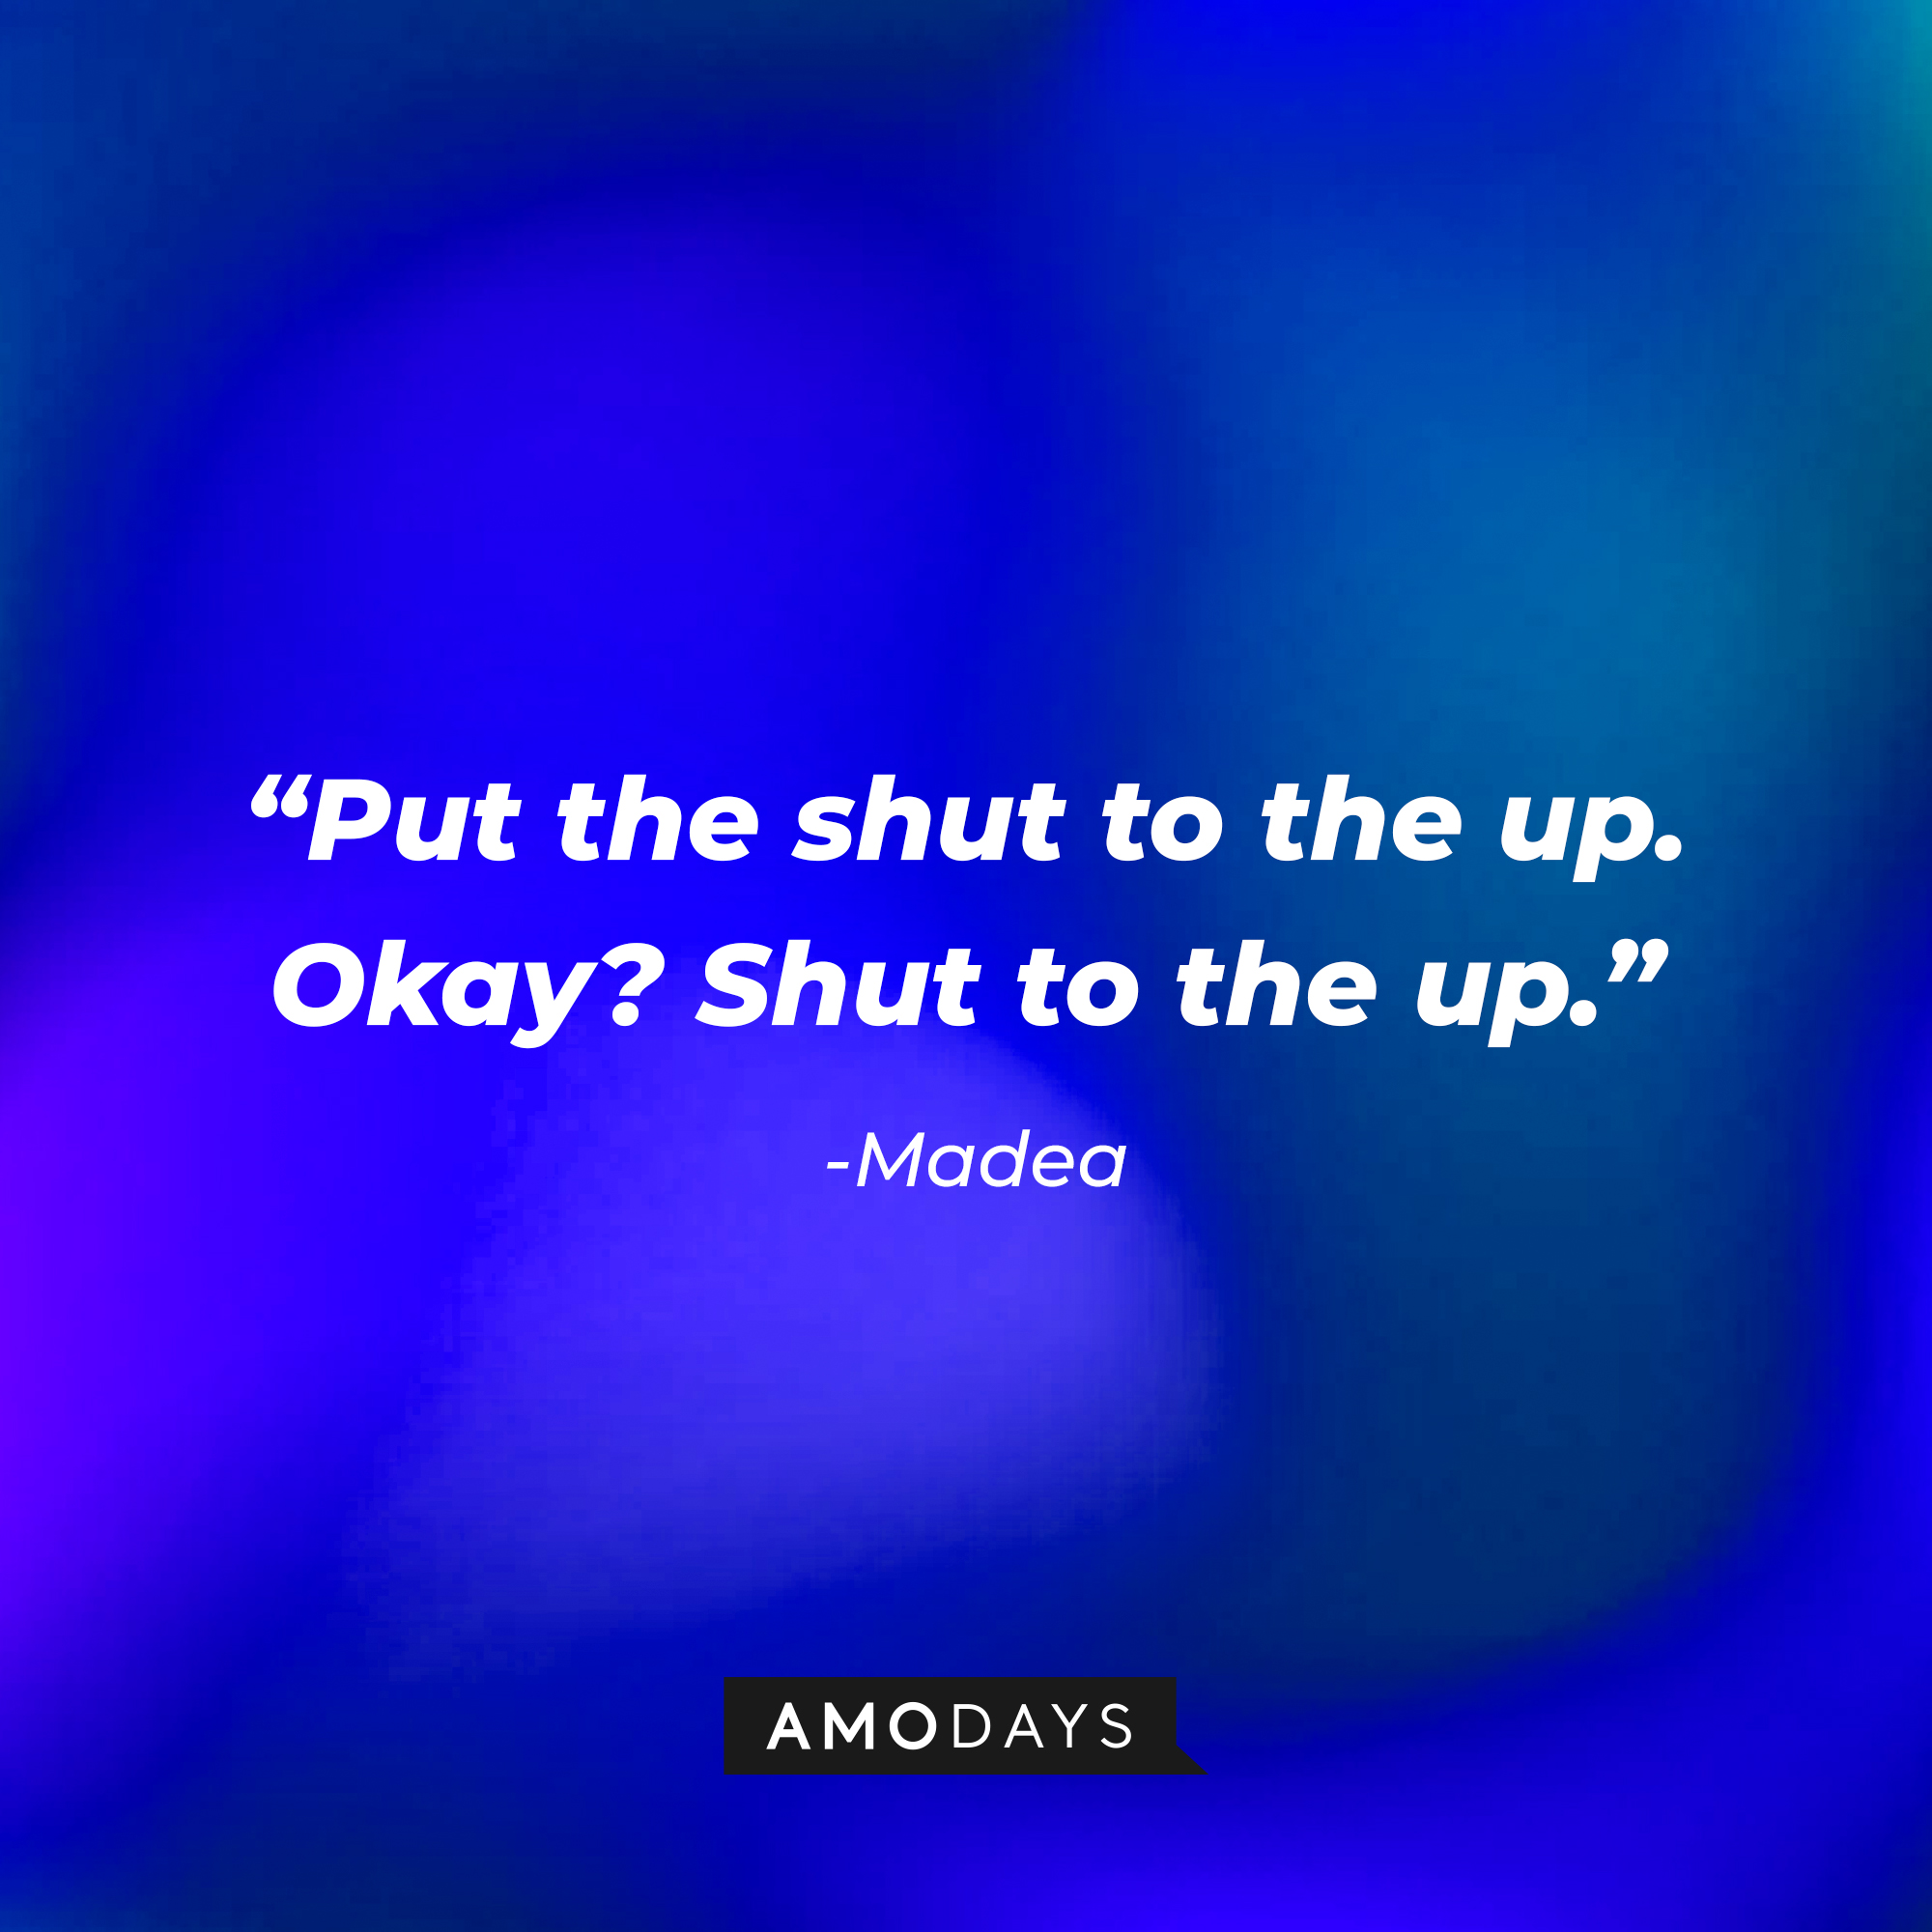 Madea’s quote: “Put the shut to the up. Okay? Shut to the up.” | Source: AmoDays